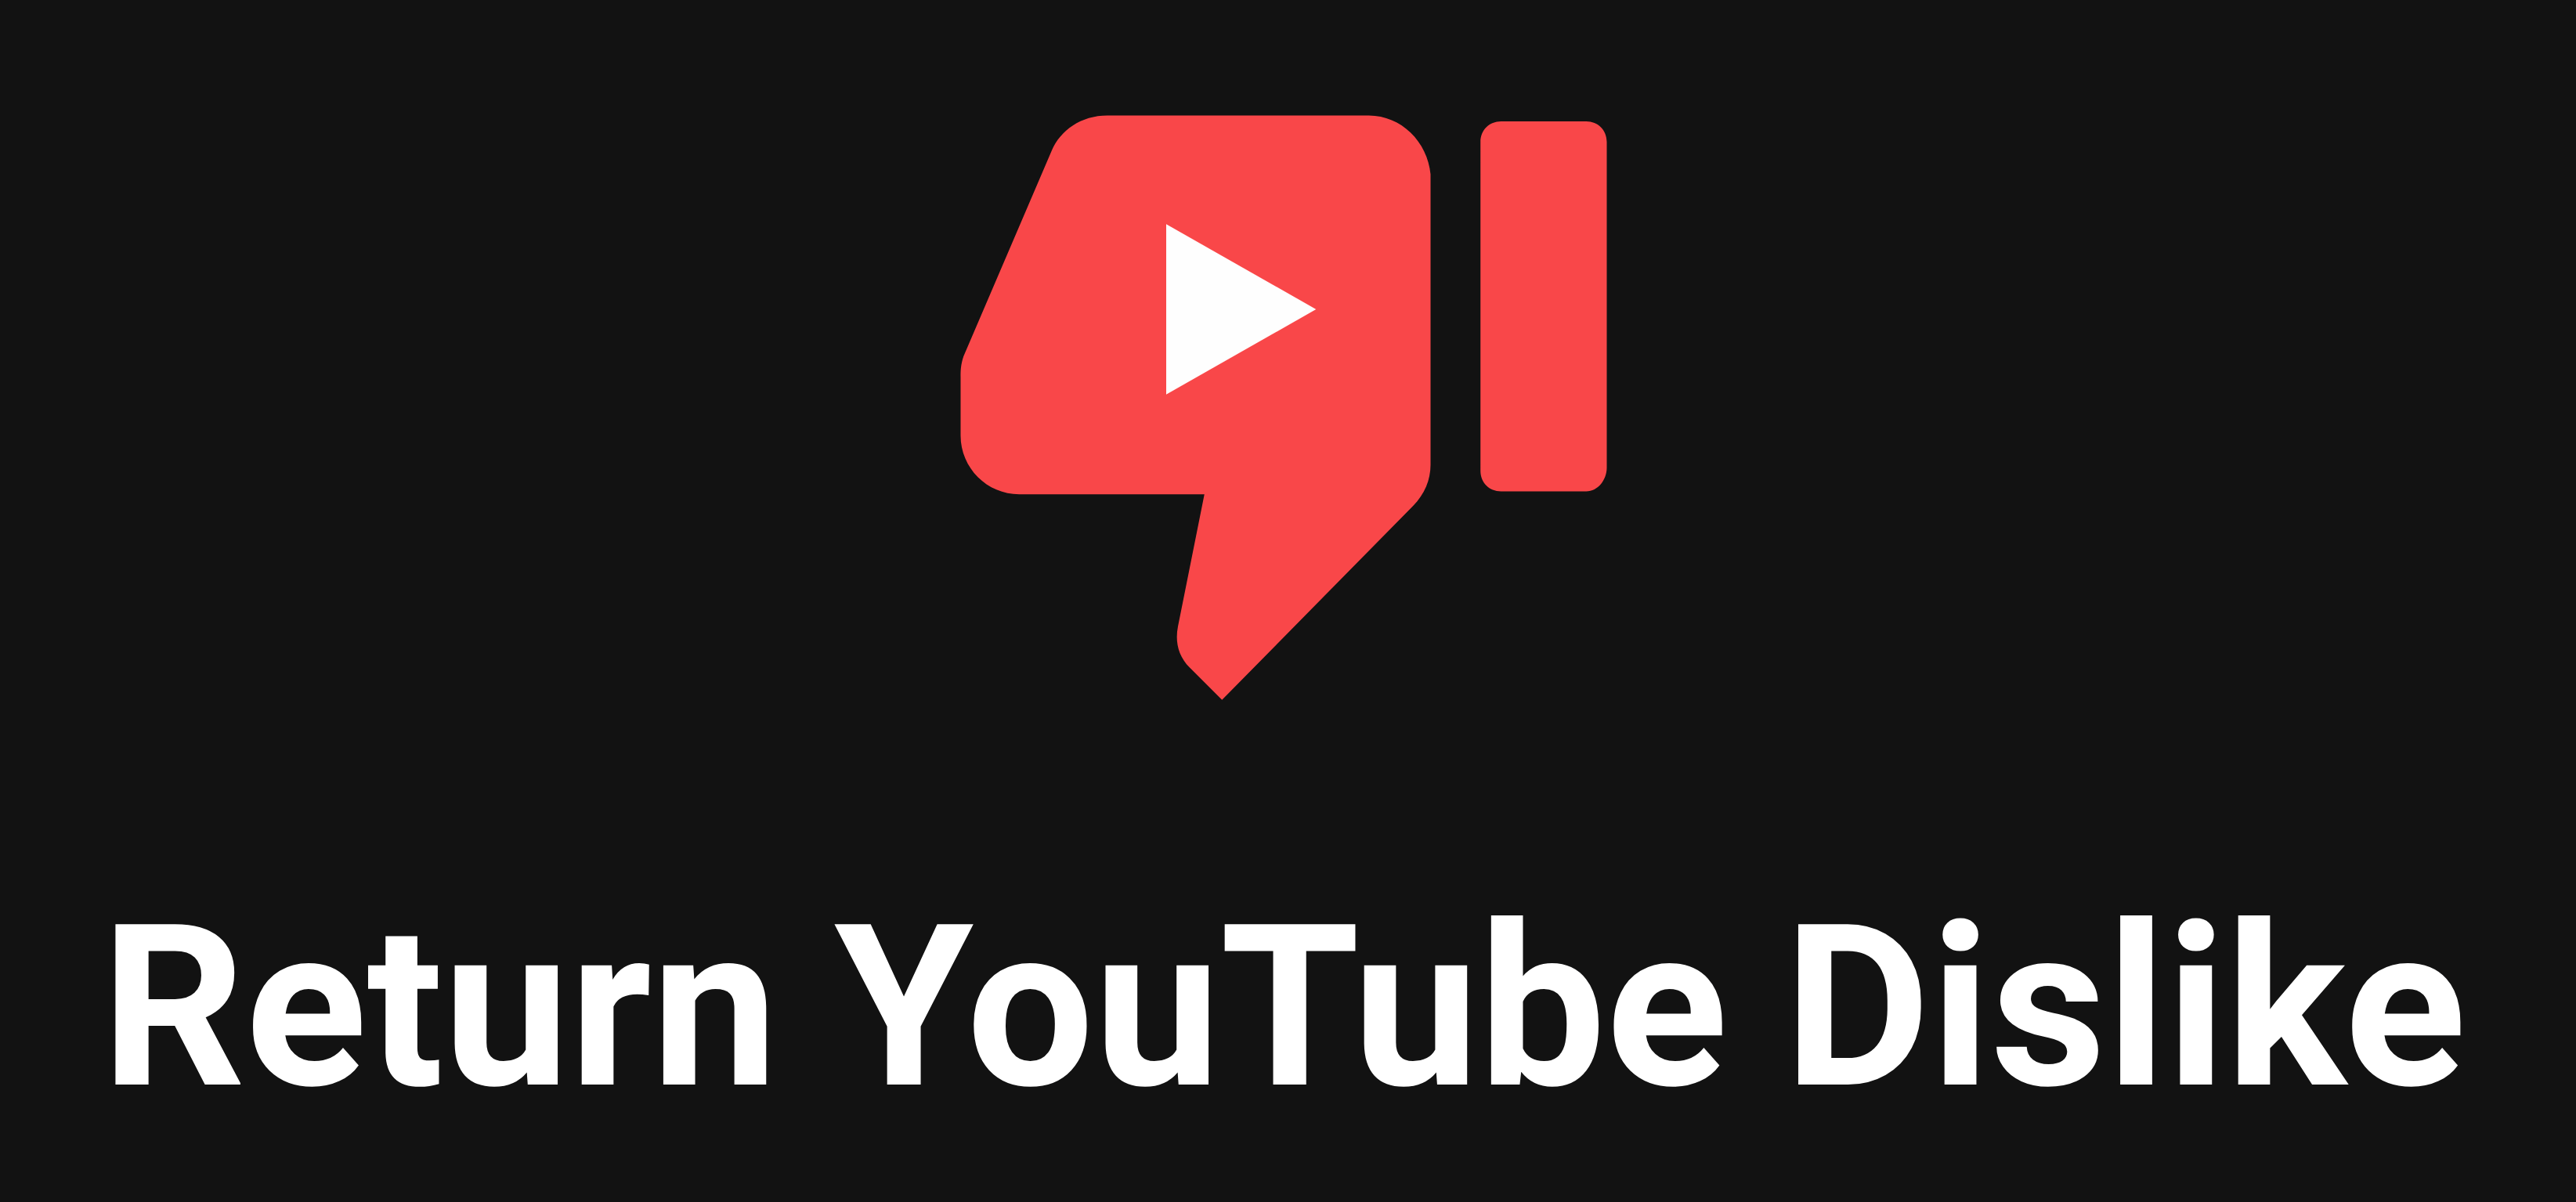 How to get the YouTube dislike count back